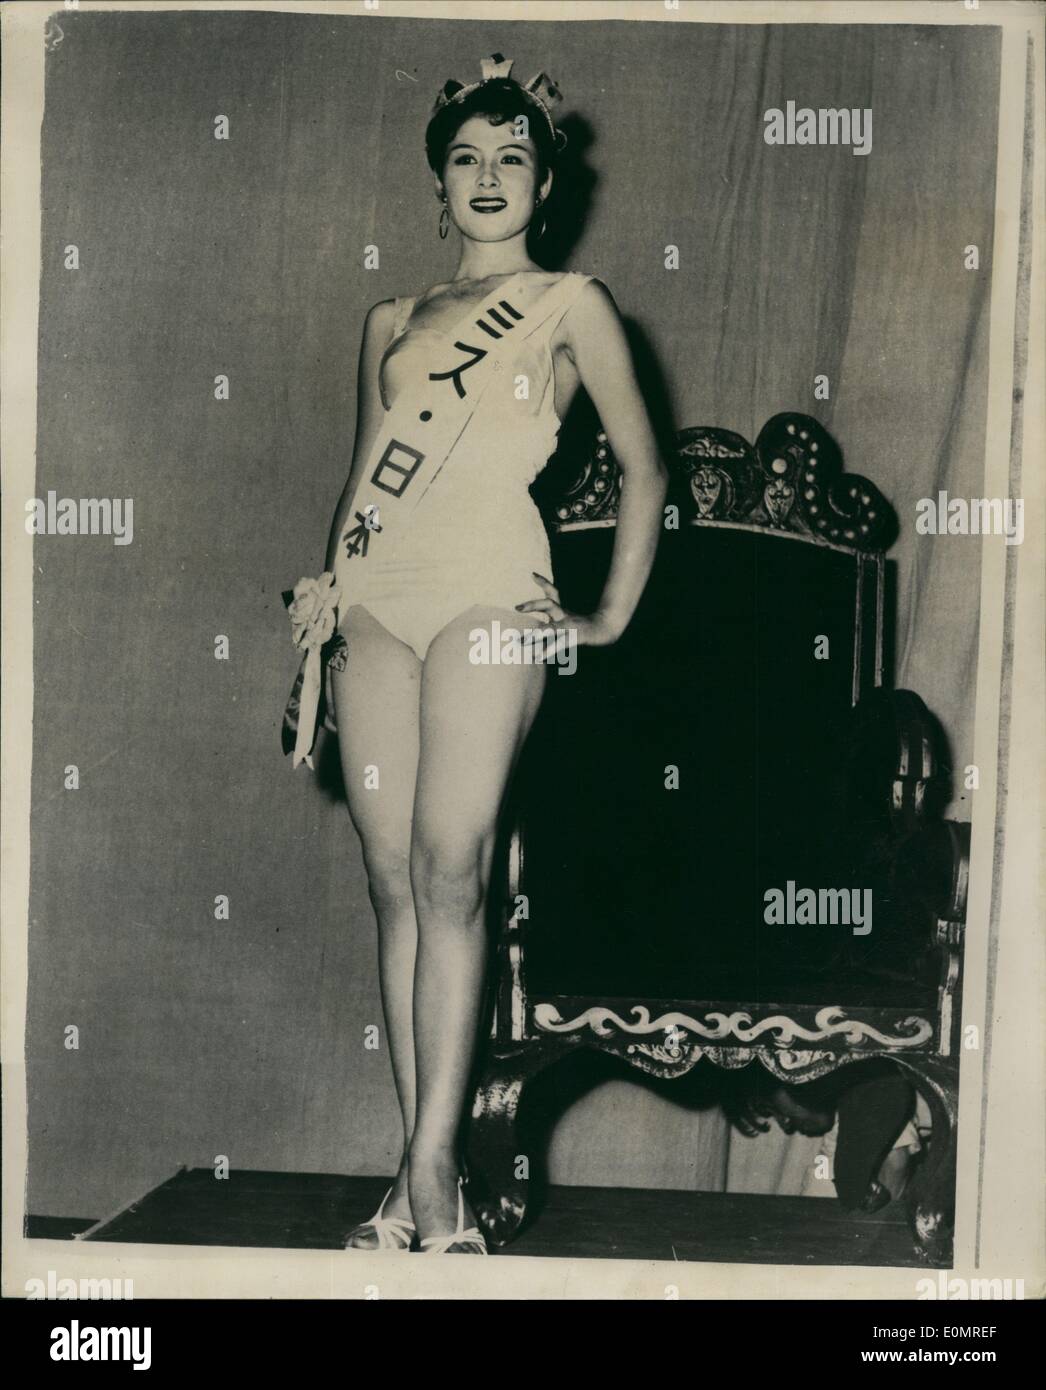 Jun. 06, 1956 - Tokyo Fashion model becomes ''Miss Japan 1956'' : 20-year old Tokio fashion model, Miss Keiko Takahashi, outshone eleven other finalists to become ''Miss Japan 1956'' at the contest hed in Tokio recently. Miss Takahashi, who will take part in the Miss Universe Beauty Contest at Long Beach, California, next month, is 5ft. 6 in height, with a 24-25-35 figure. Photo shows Miss Keiko Takahashi photographed after her election in Tokio as 'Miss Japan 1956' Stock Photo